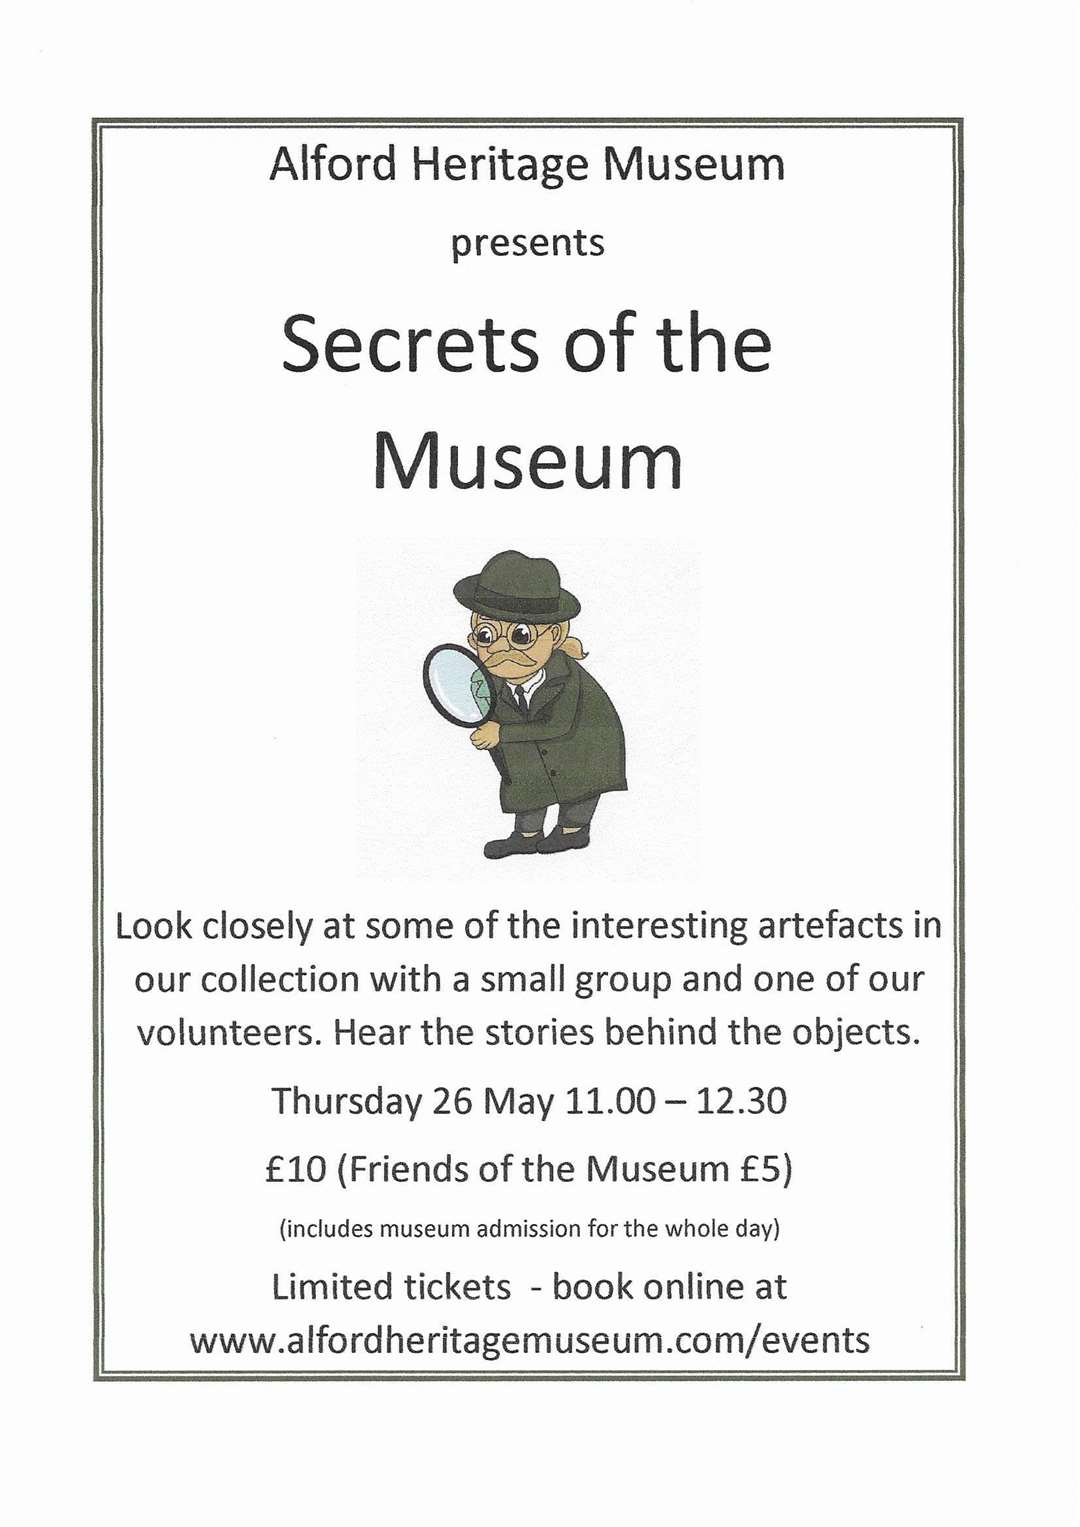 The new event will pair small groups with volunteers to learn about the museum's most interesting artefacts.